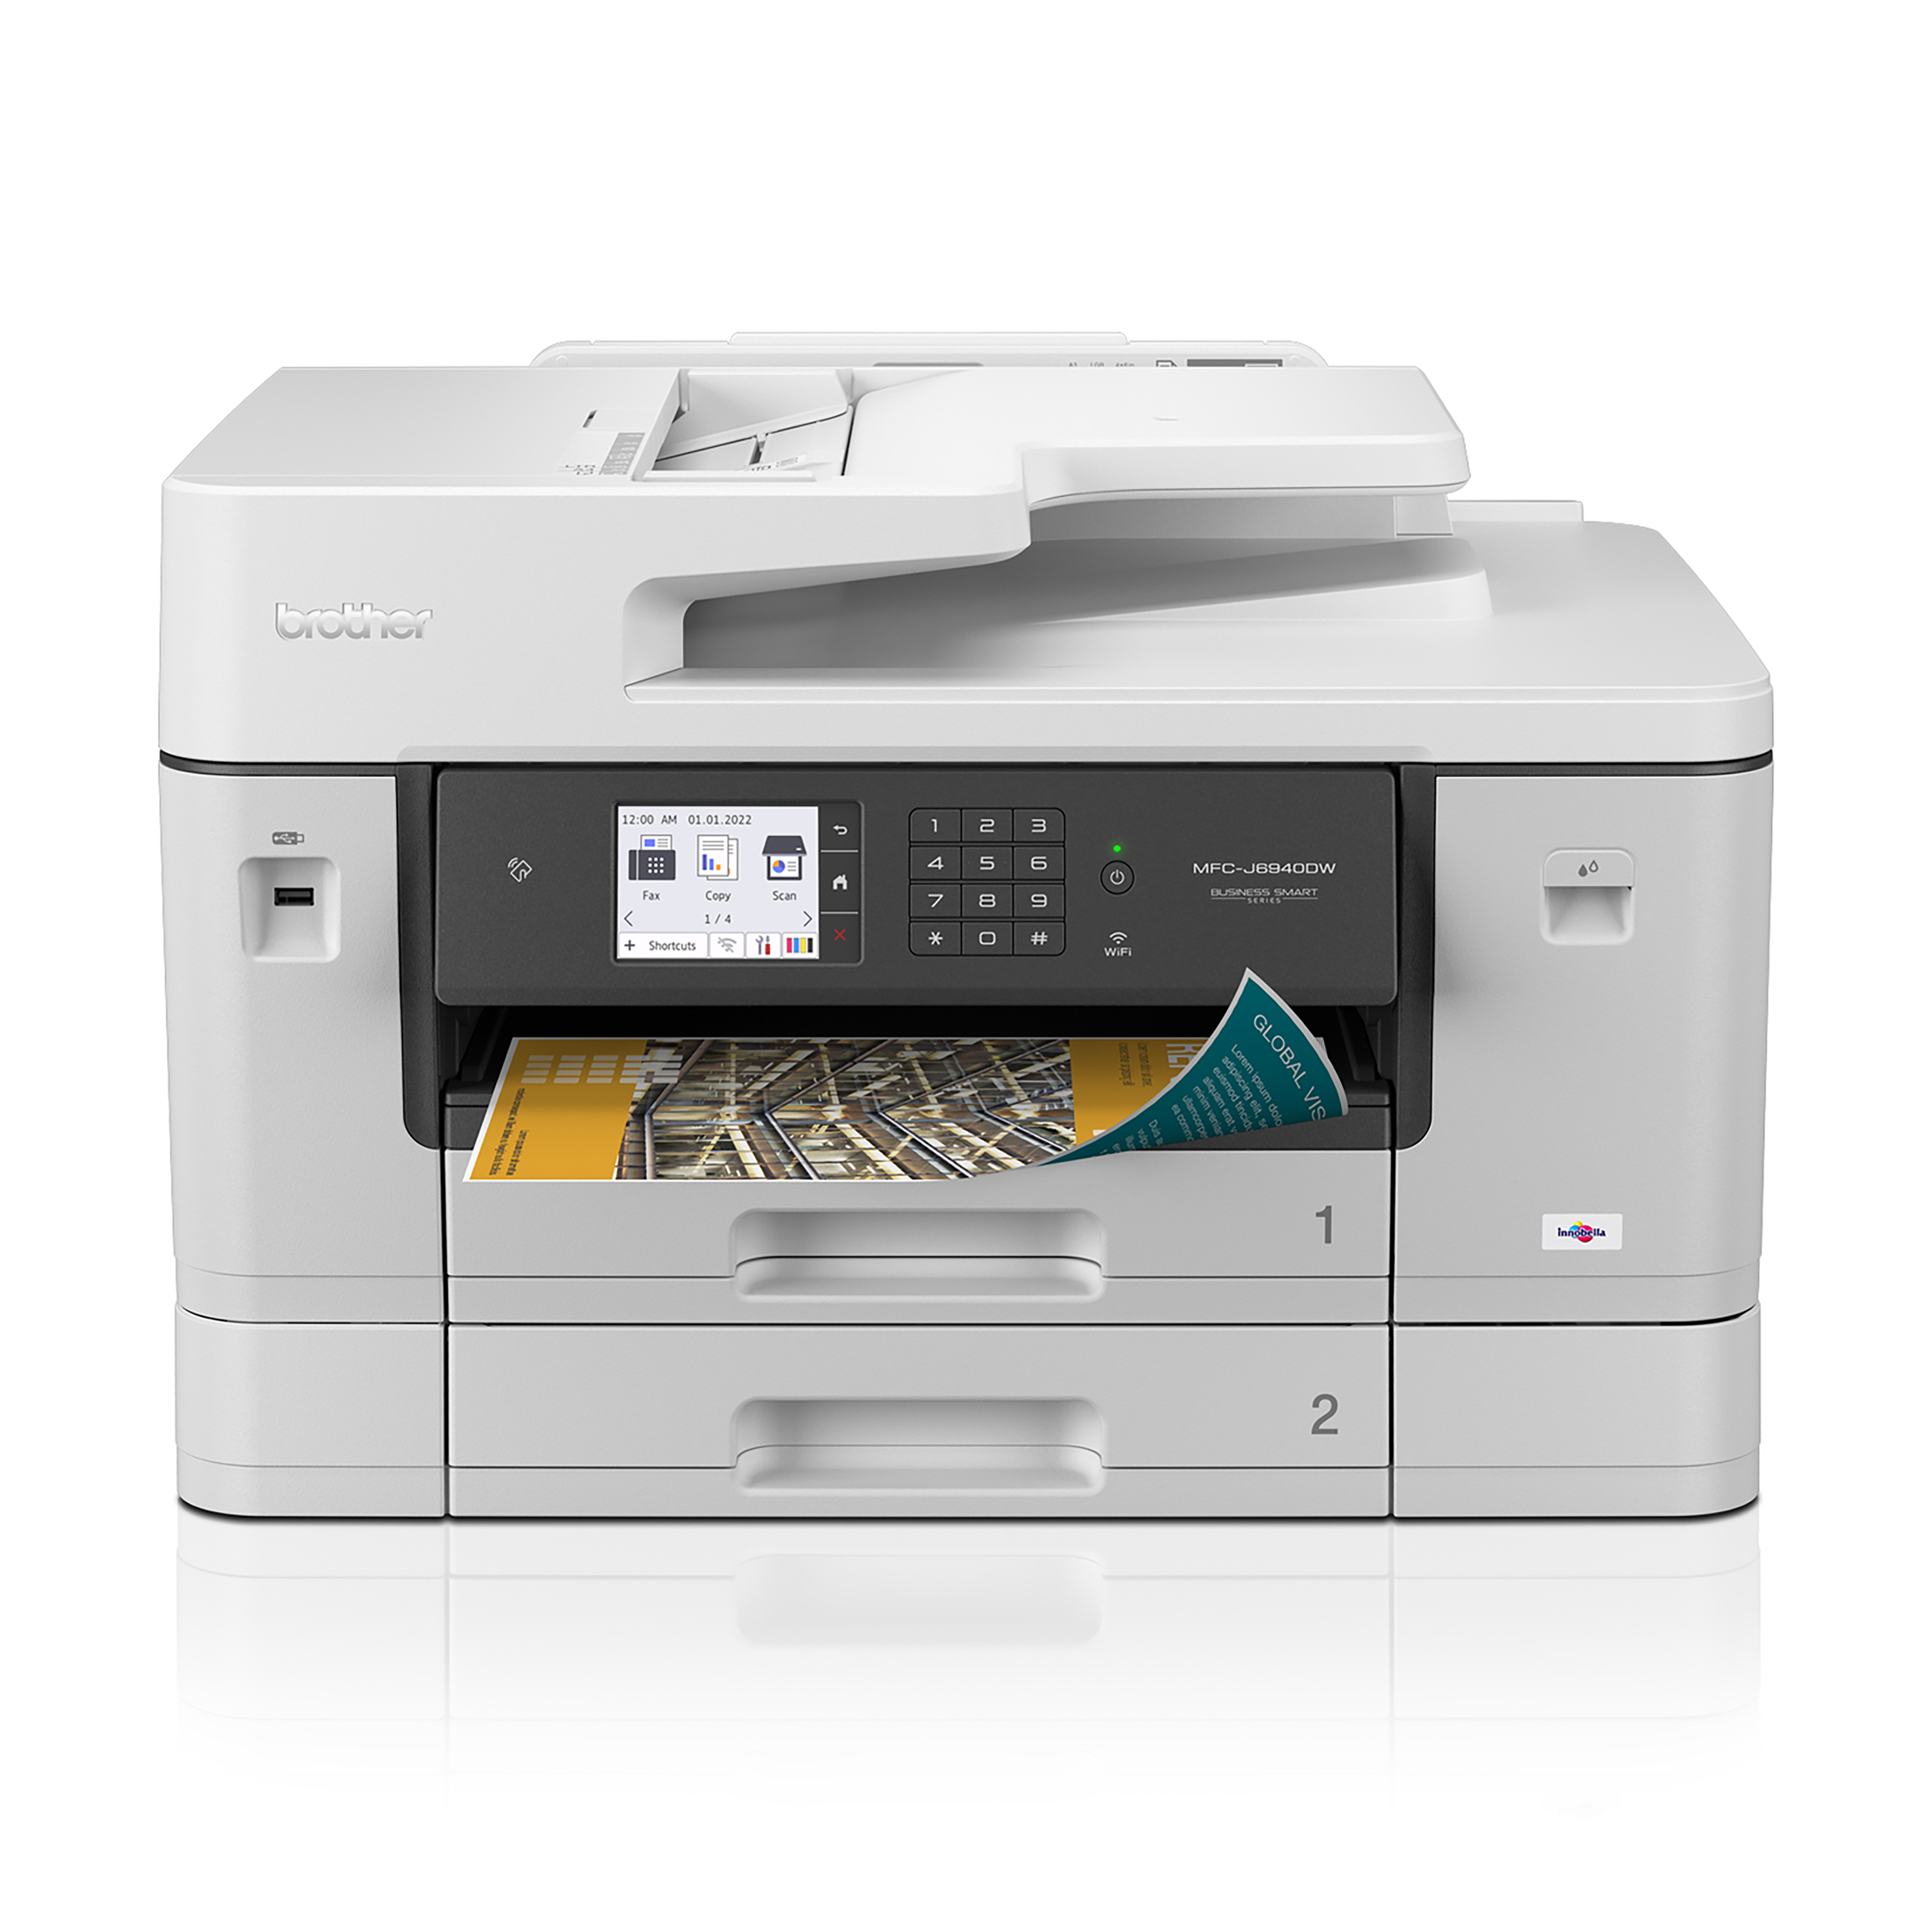 Brother MFC-J6940DW Color Inkjet All-in-One Printer with 500-sheet total  paper capacity and the ability to print, scan, copy and fax up to 11”x17